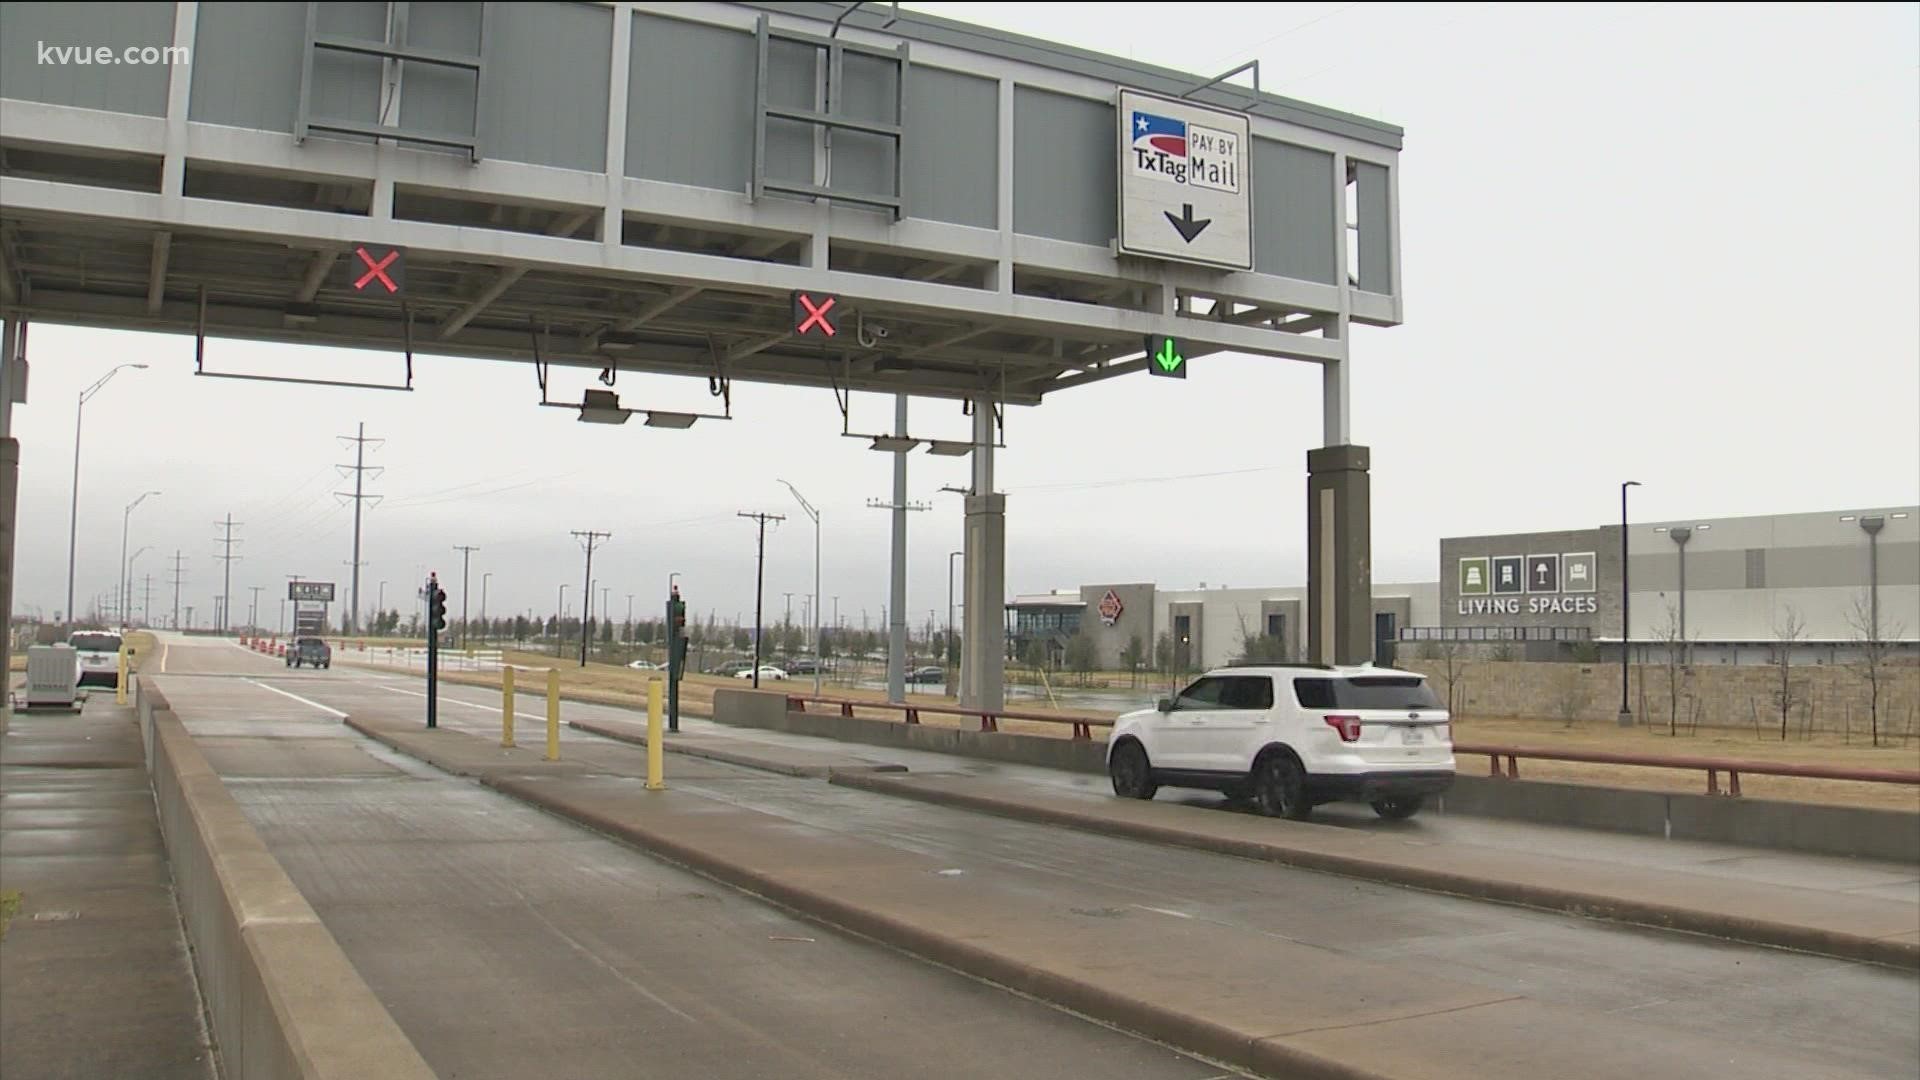 The new toll rates went into effect on Jan. 1.